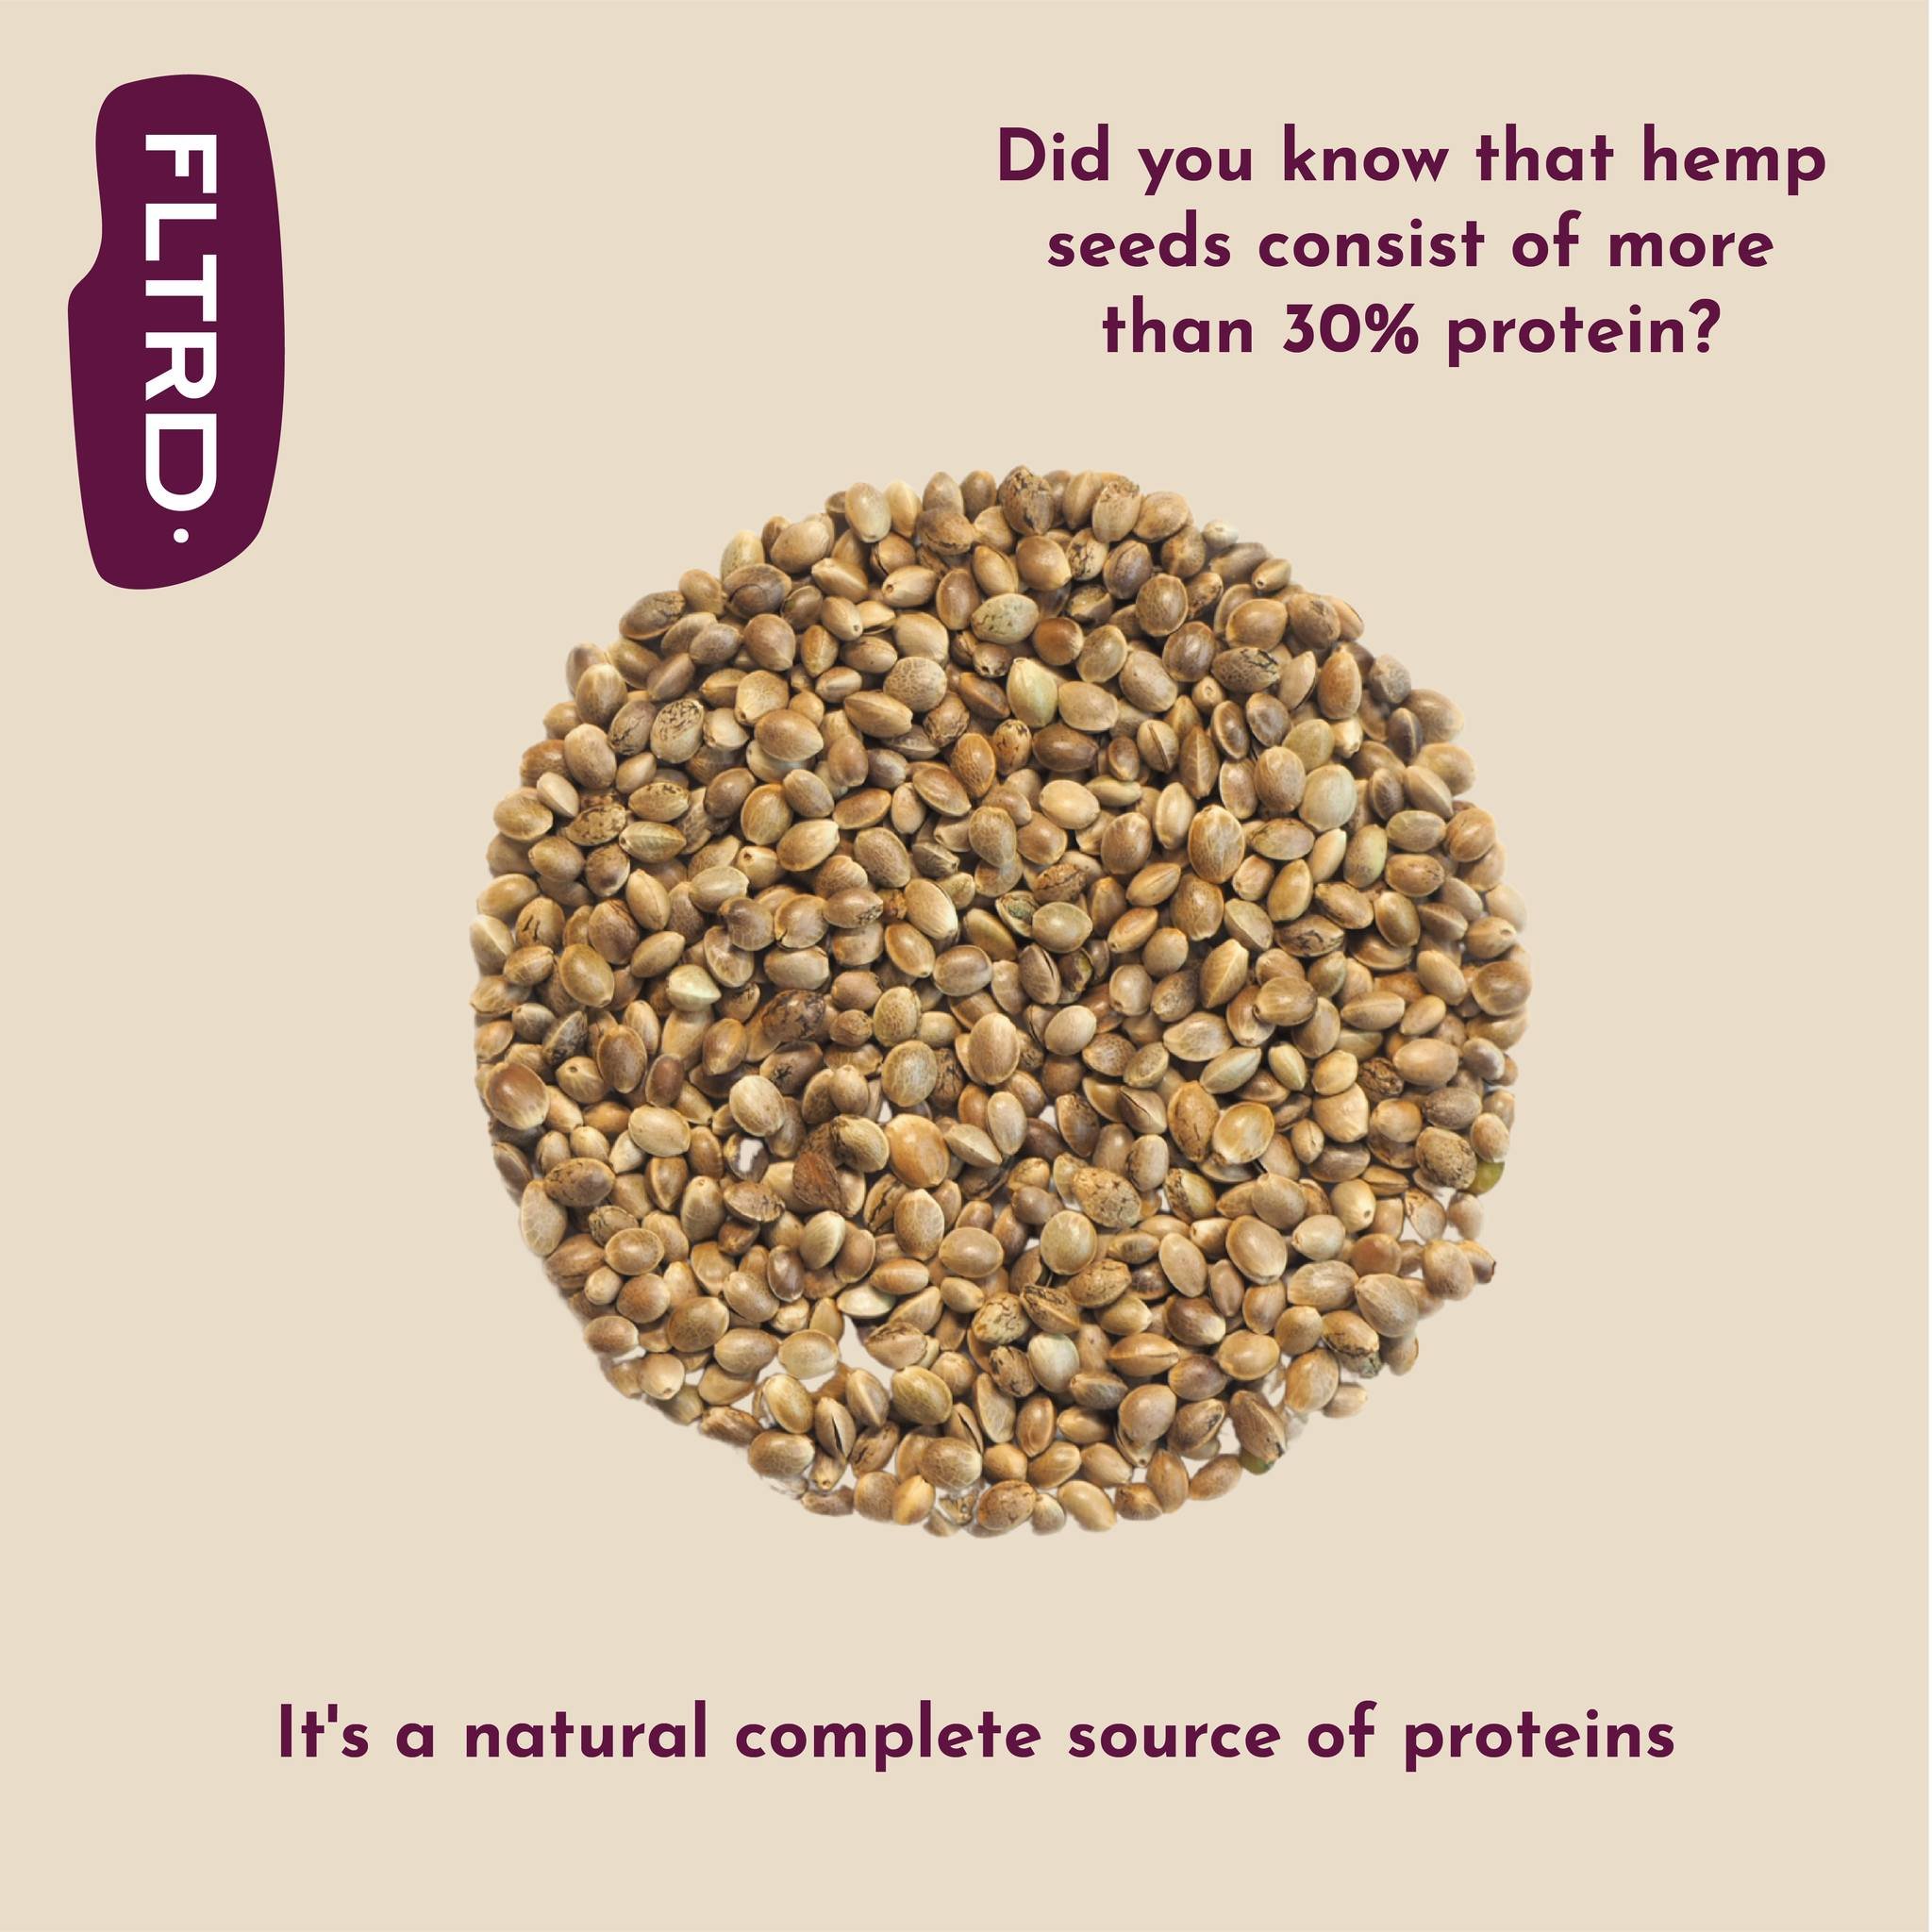 The seed of the hemp plant, hemp seed, is rich in healthy fats and essential fatty acids. Additionally, it is an excellent source of protein and contains a lot of vitamin E, phosphorus, potassium, sodium, magnesium, sulfur, calcium, iron, and zinc.

